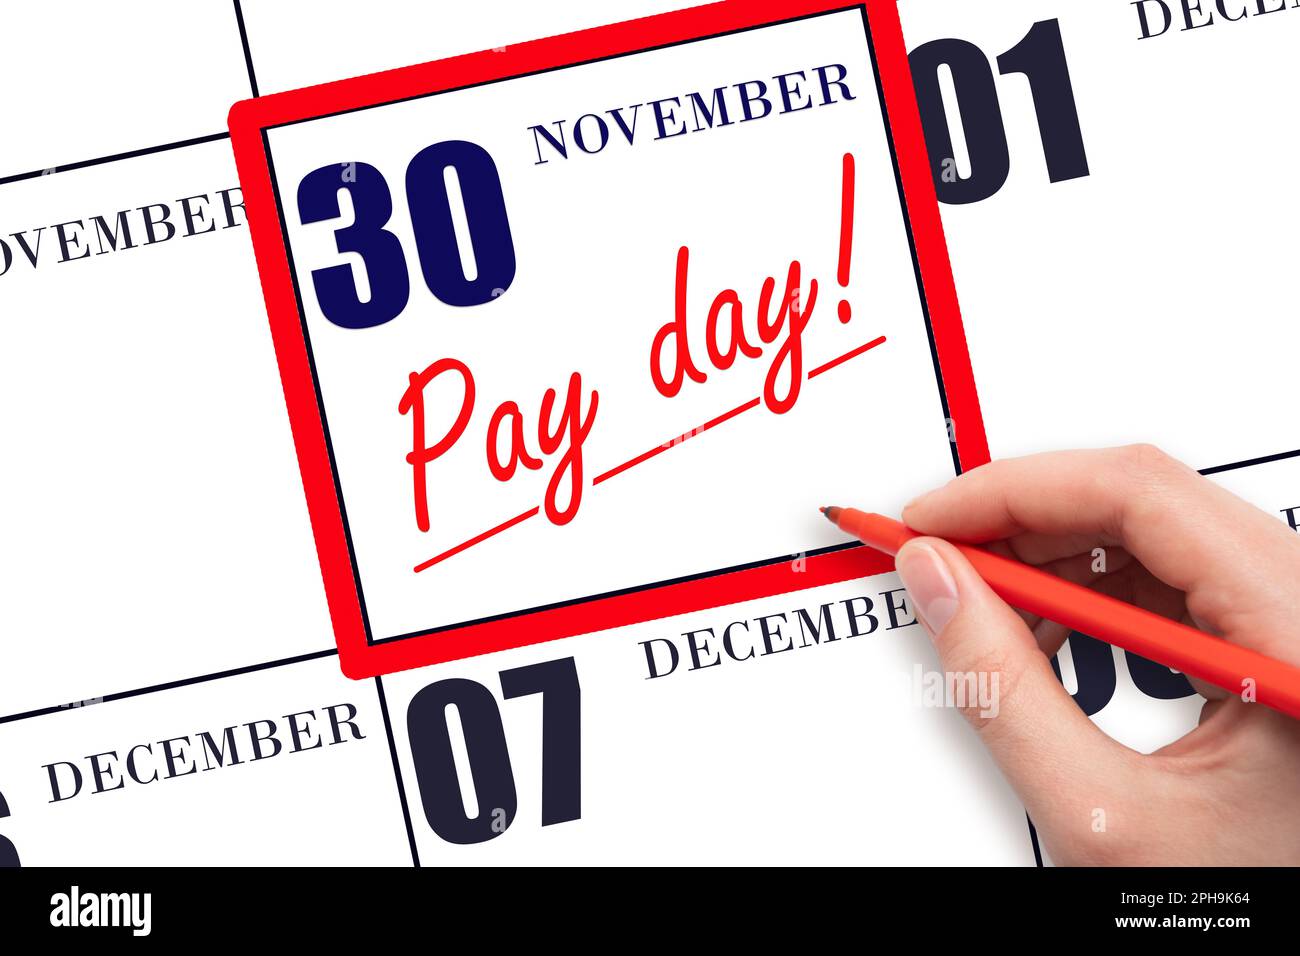 30th day of November. Hand writing text PAY DATE on calendar date November 30 and underline it. Payment due date.  Reminder concept of payment. Autumn Stock Photo